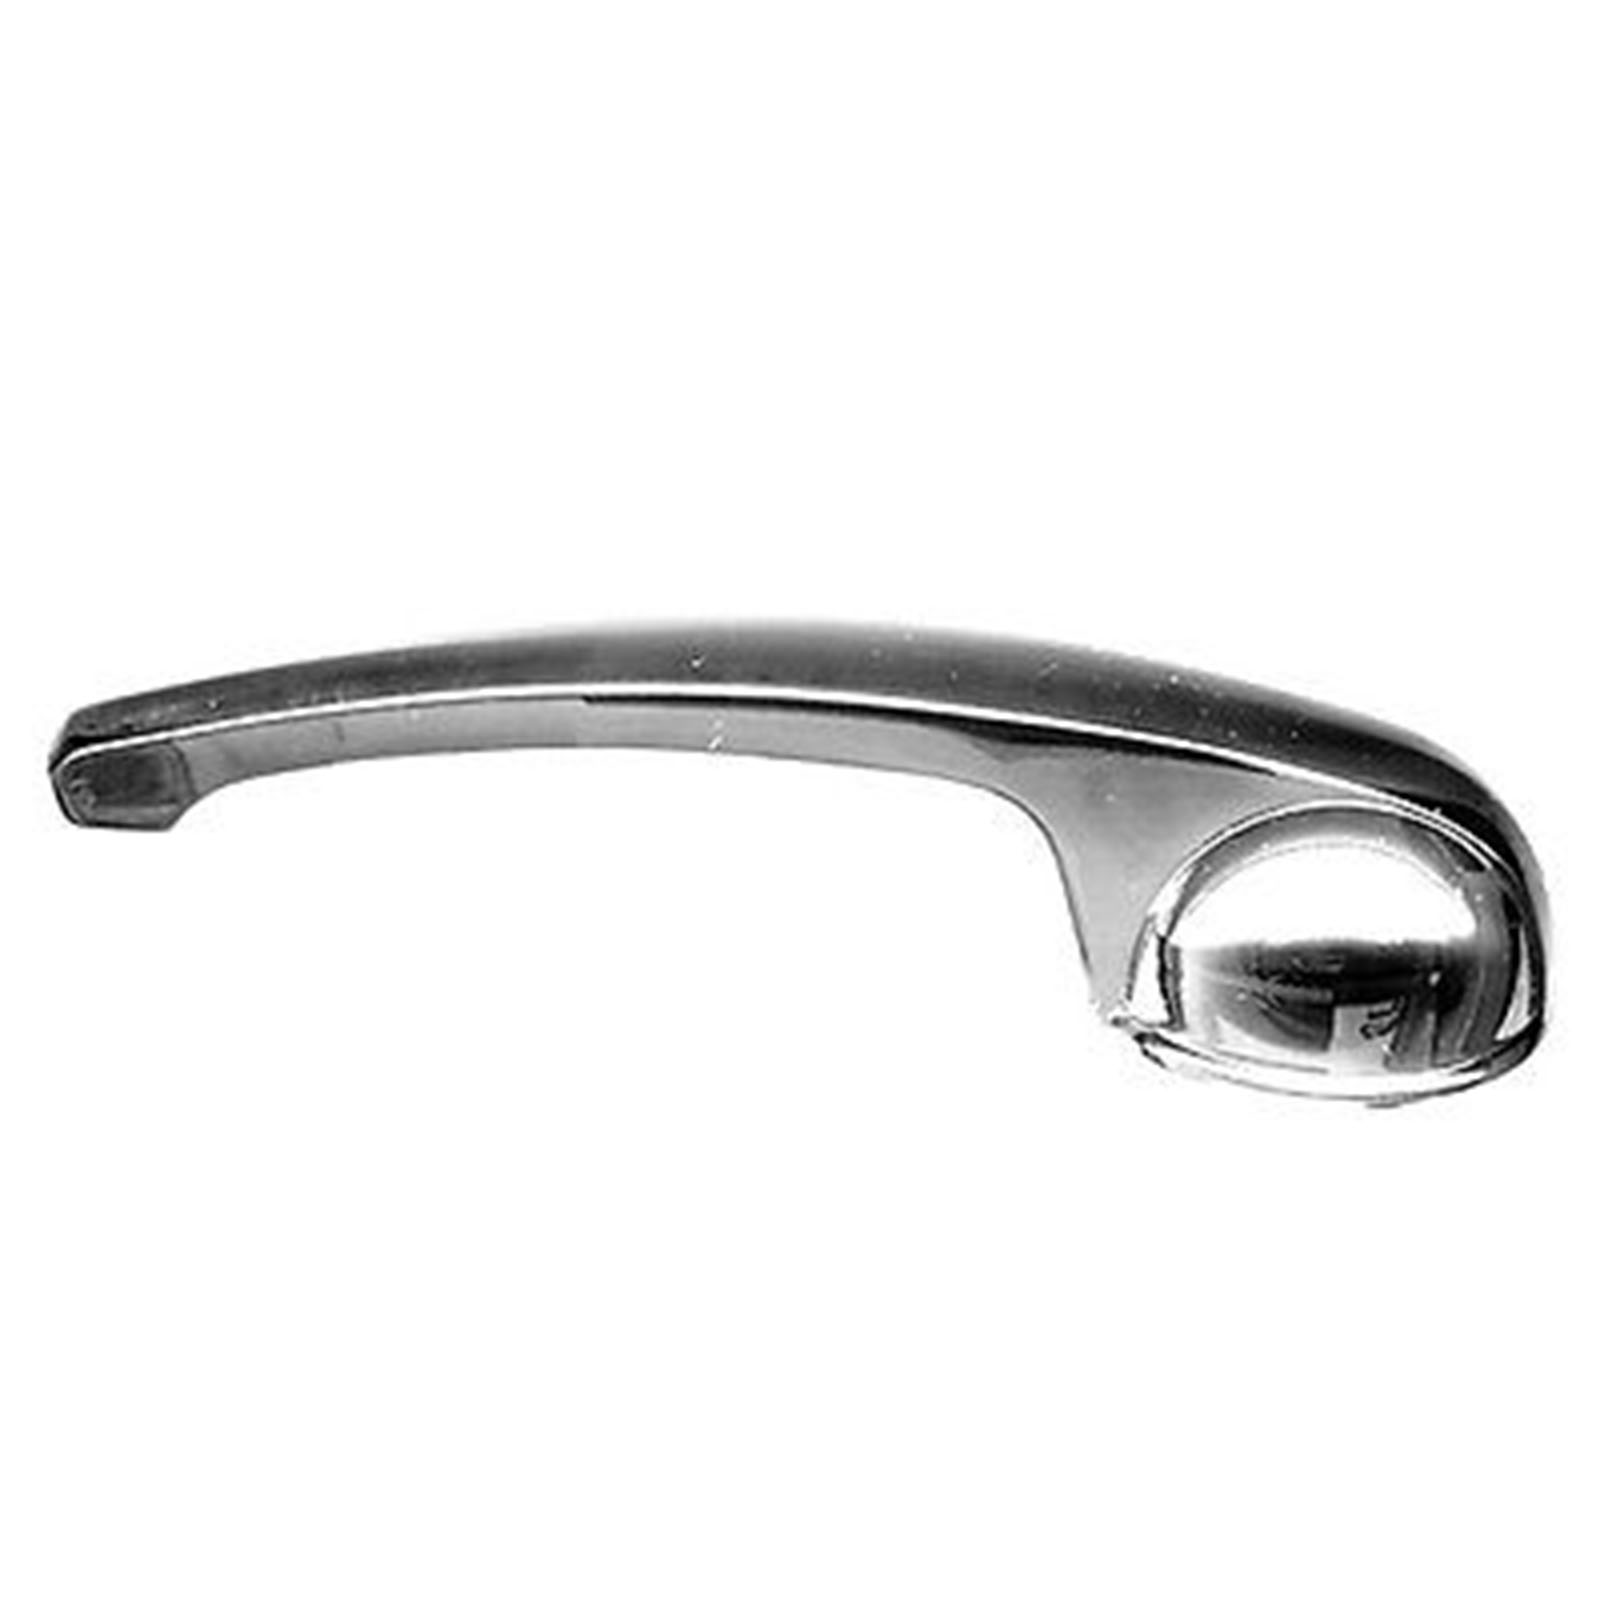 Details About 47 66 Chevy Gmc Truck Chrome Interior Inside Door Handle Chevrolet 1947 1966